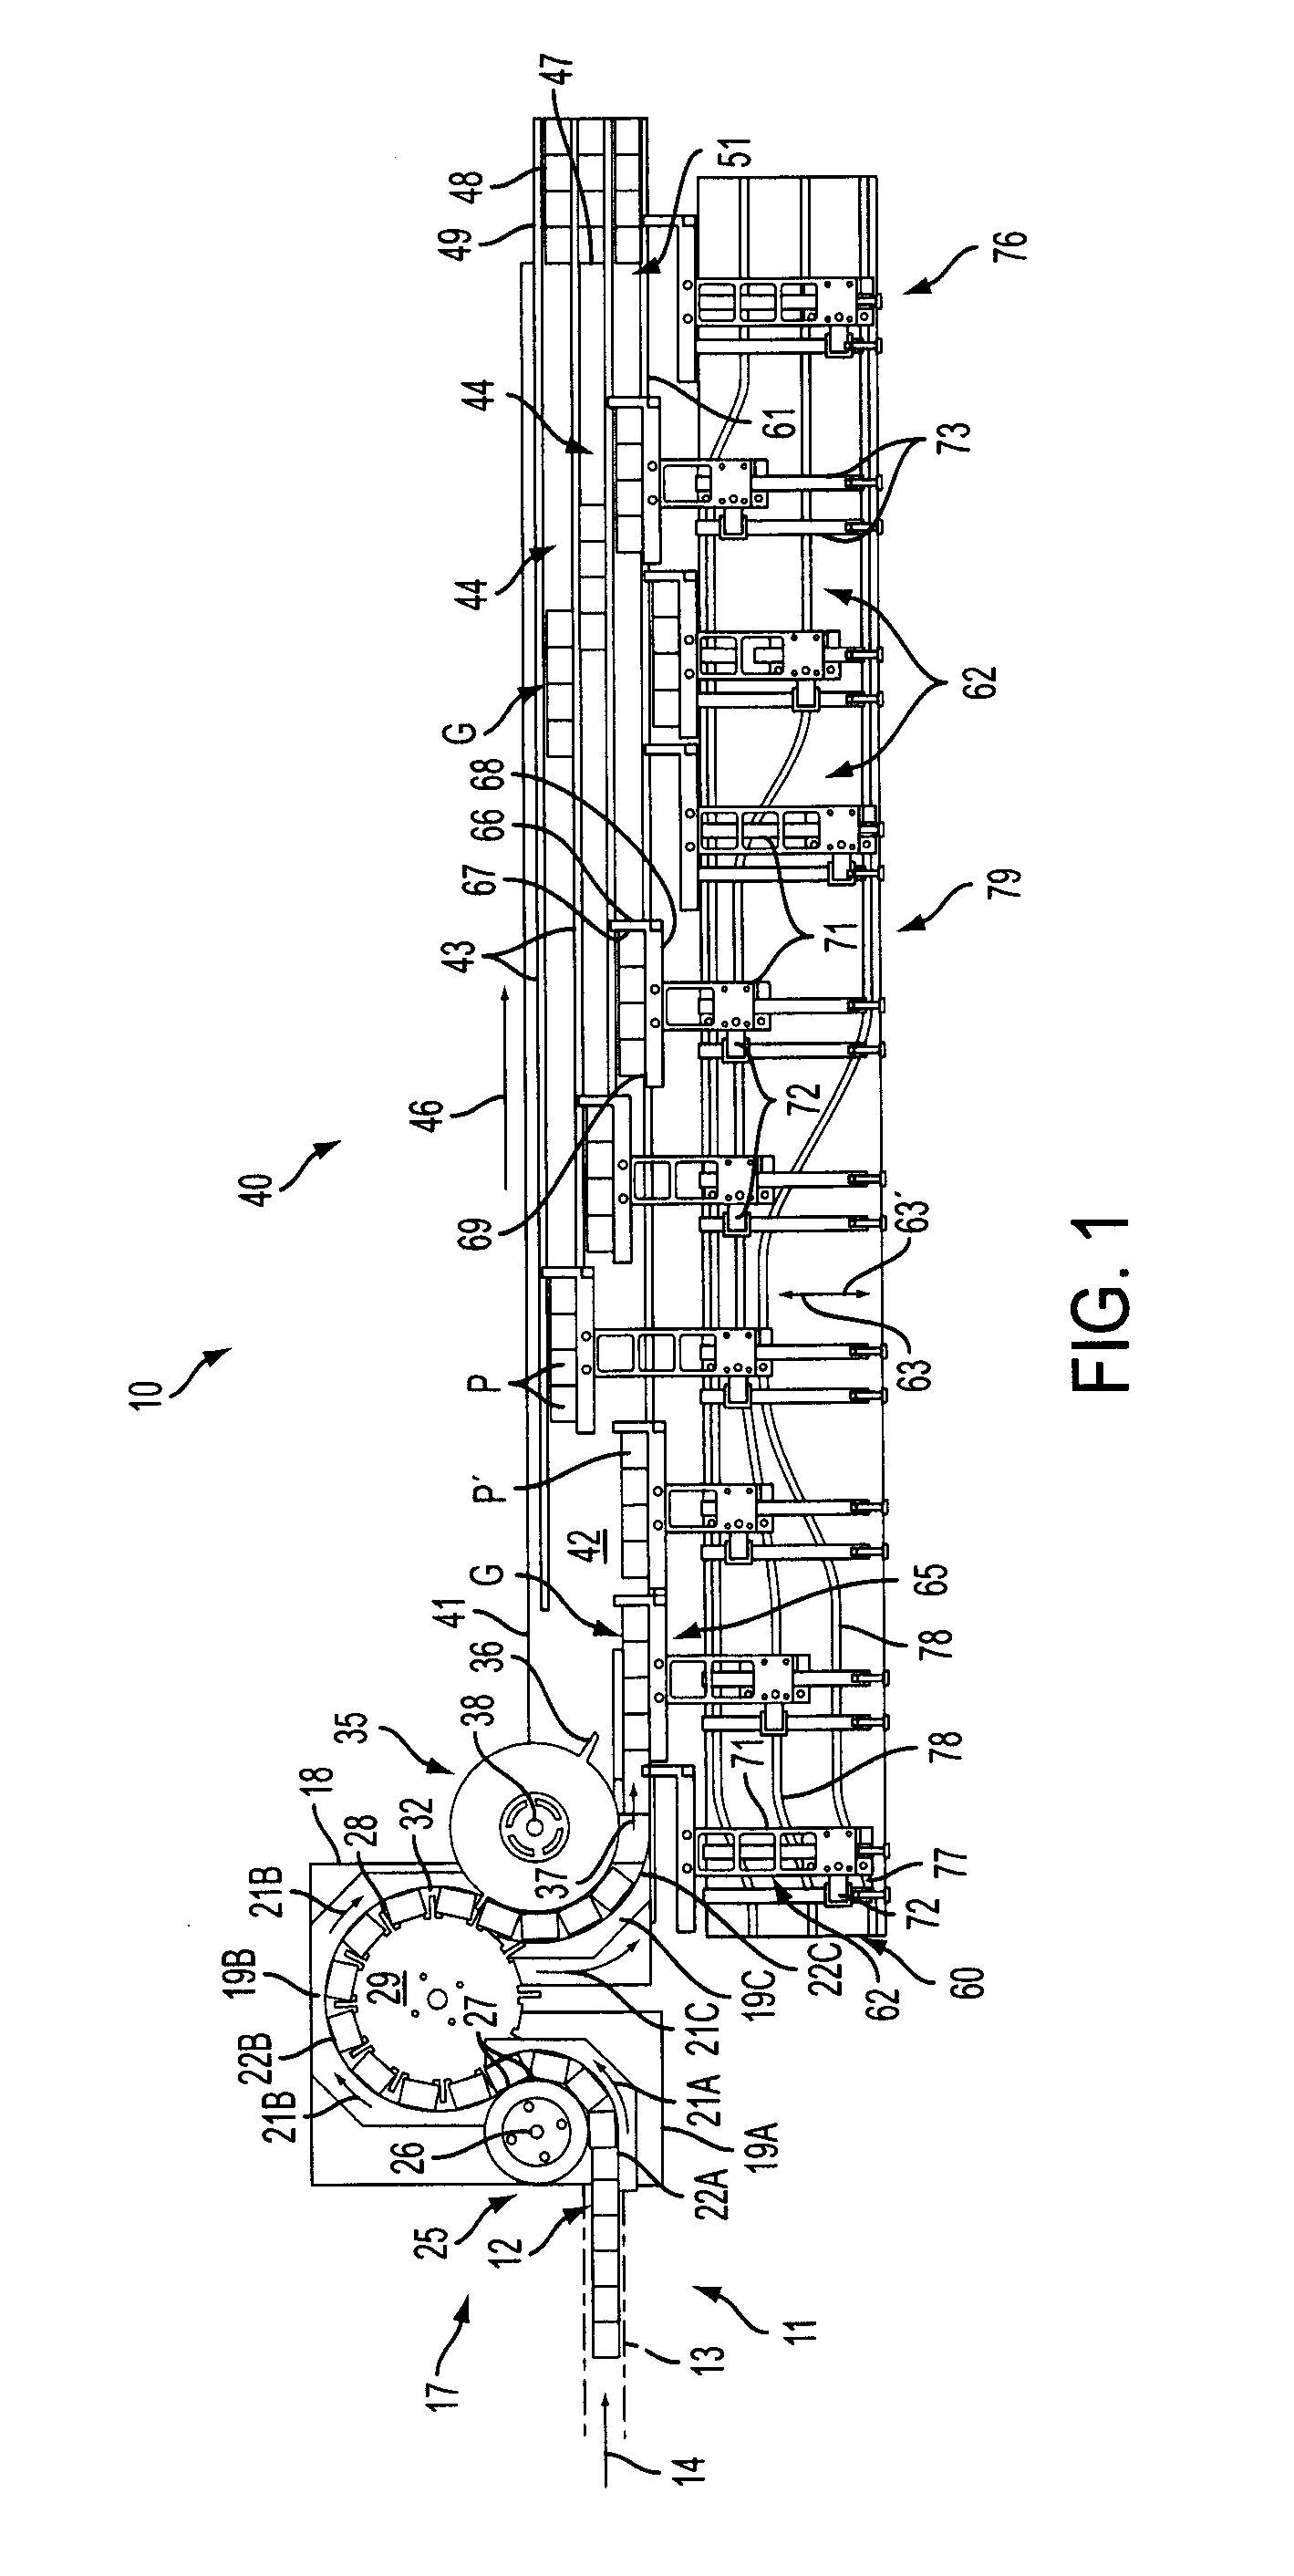 Continuous motion product selection and grouping system